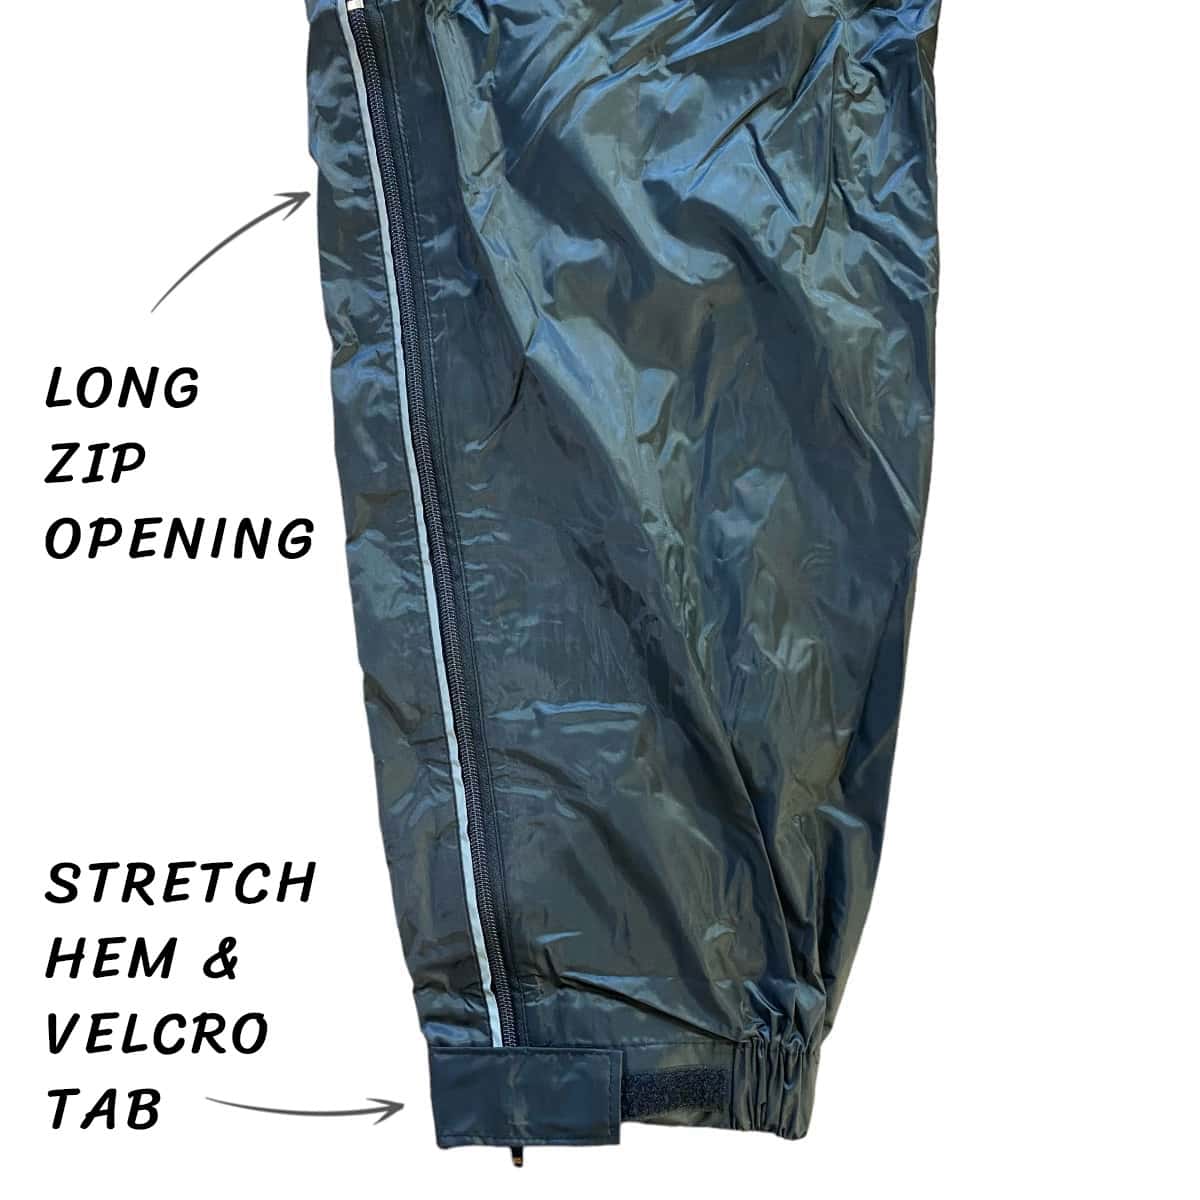 Update on a best-selling rain pant: The new Oxford Rainseal waterproof overtrousers with a long zip opening